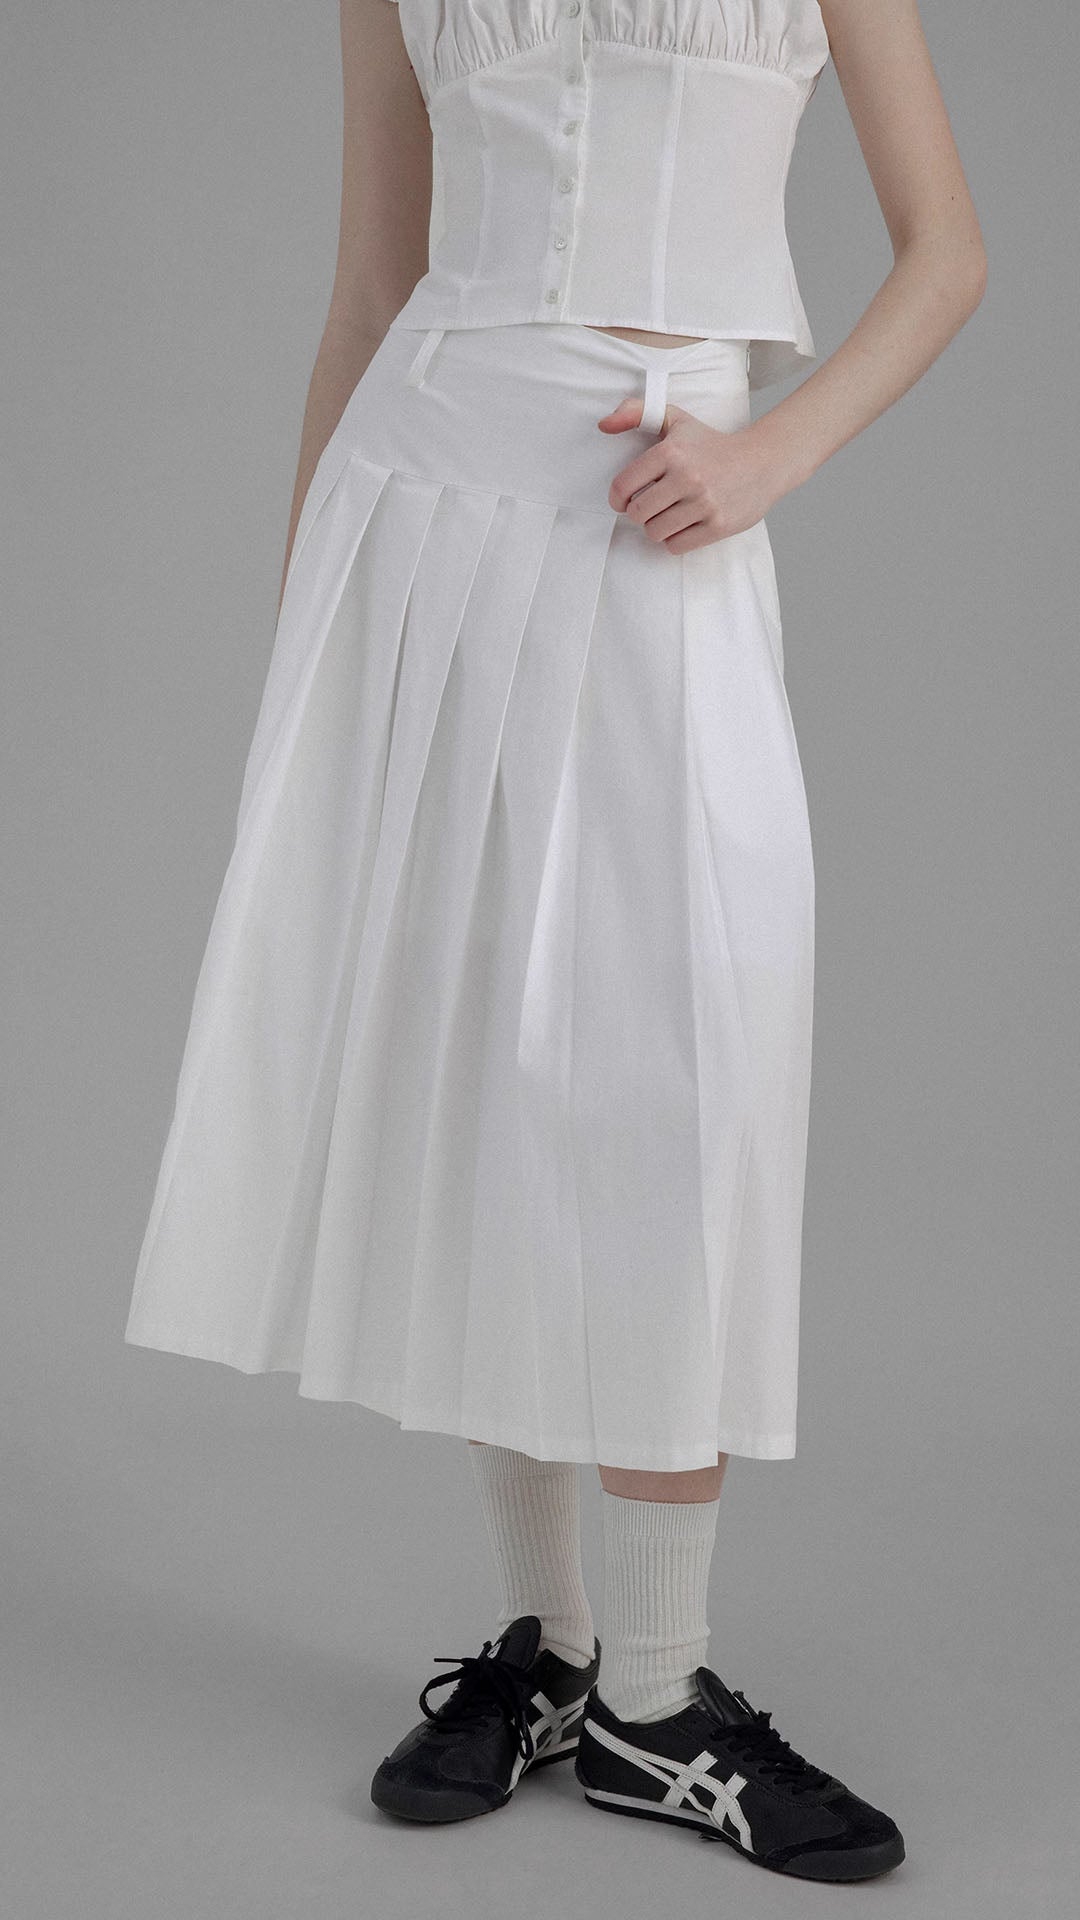 Vintage High Waist solid white Pleated Skirt / top